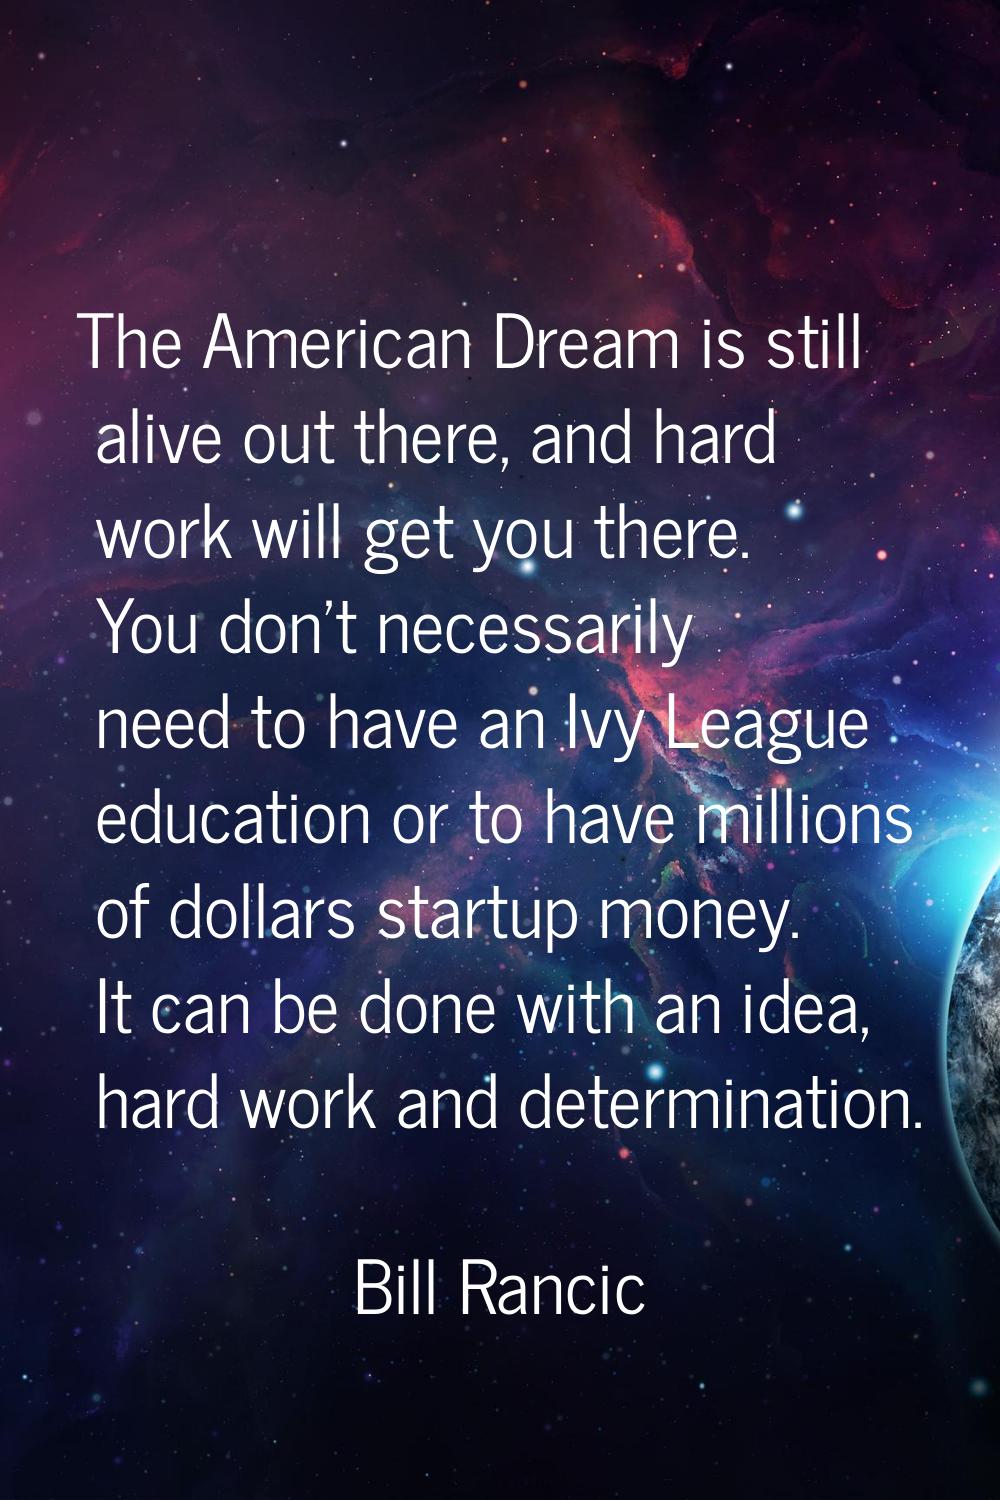 The American Dream is still alive out there, and hard work will get you there. You don't necessaril